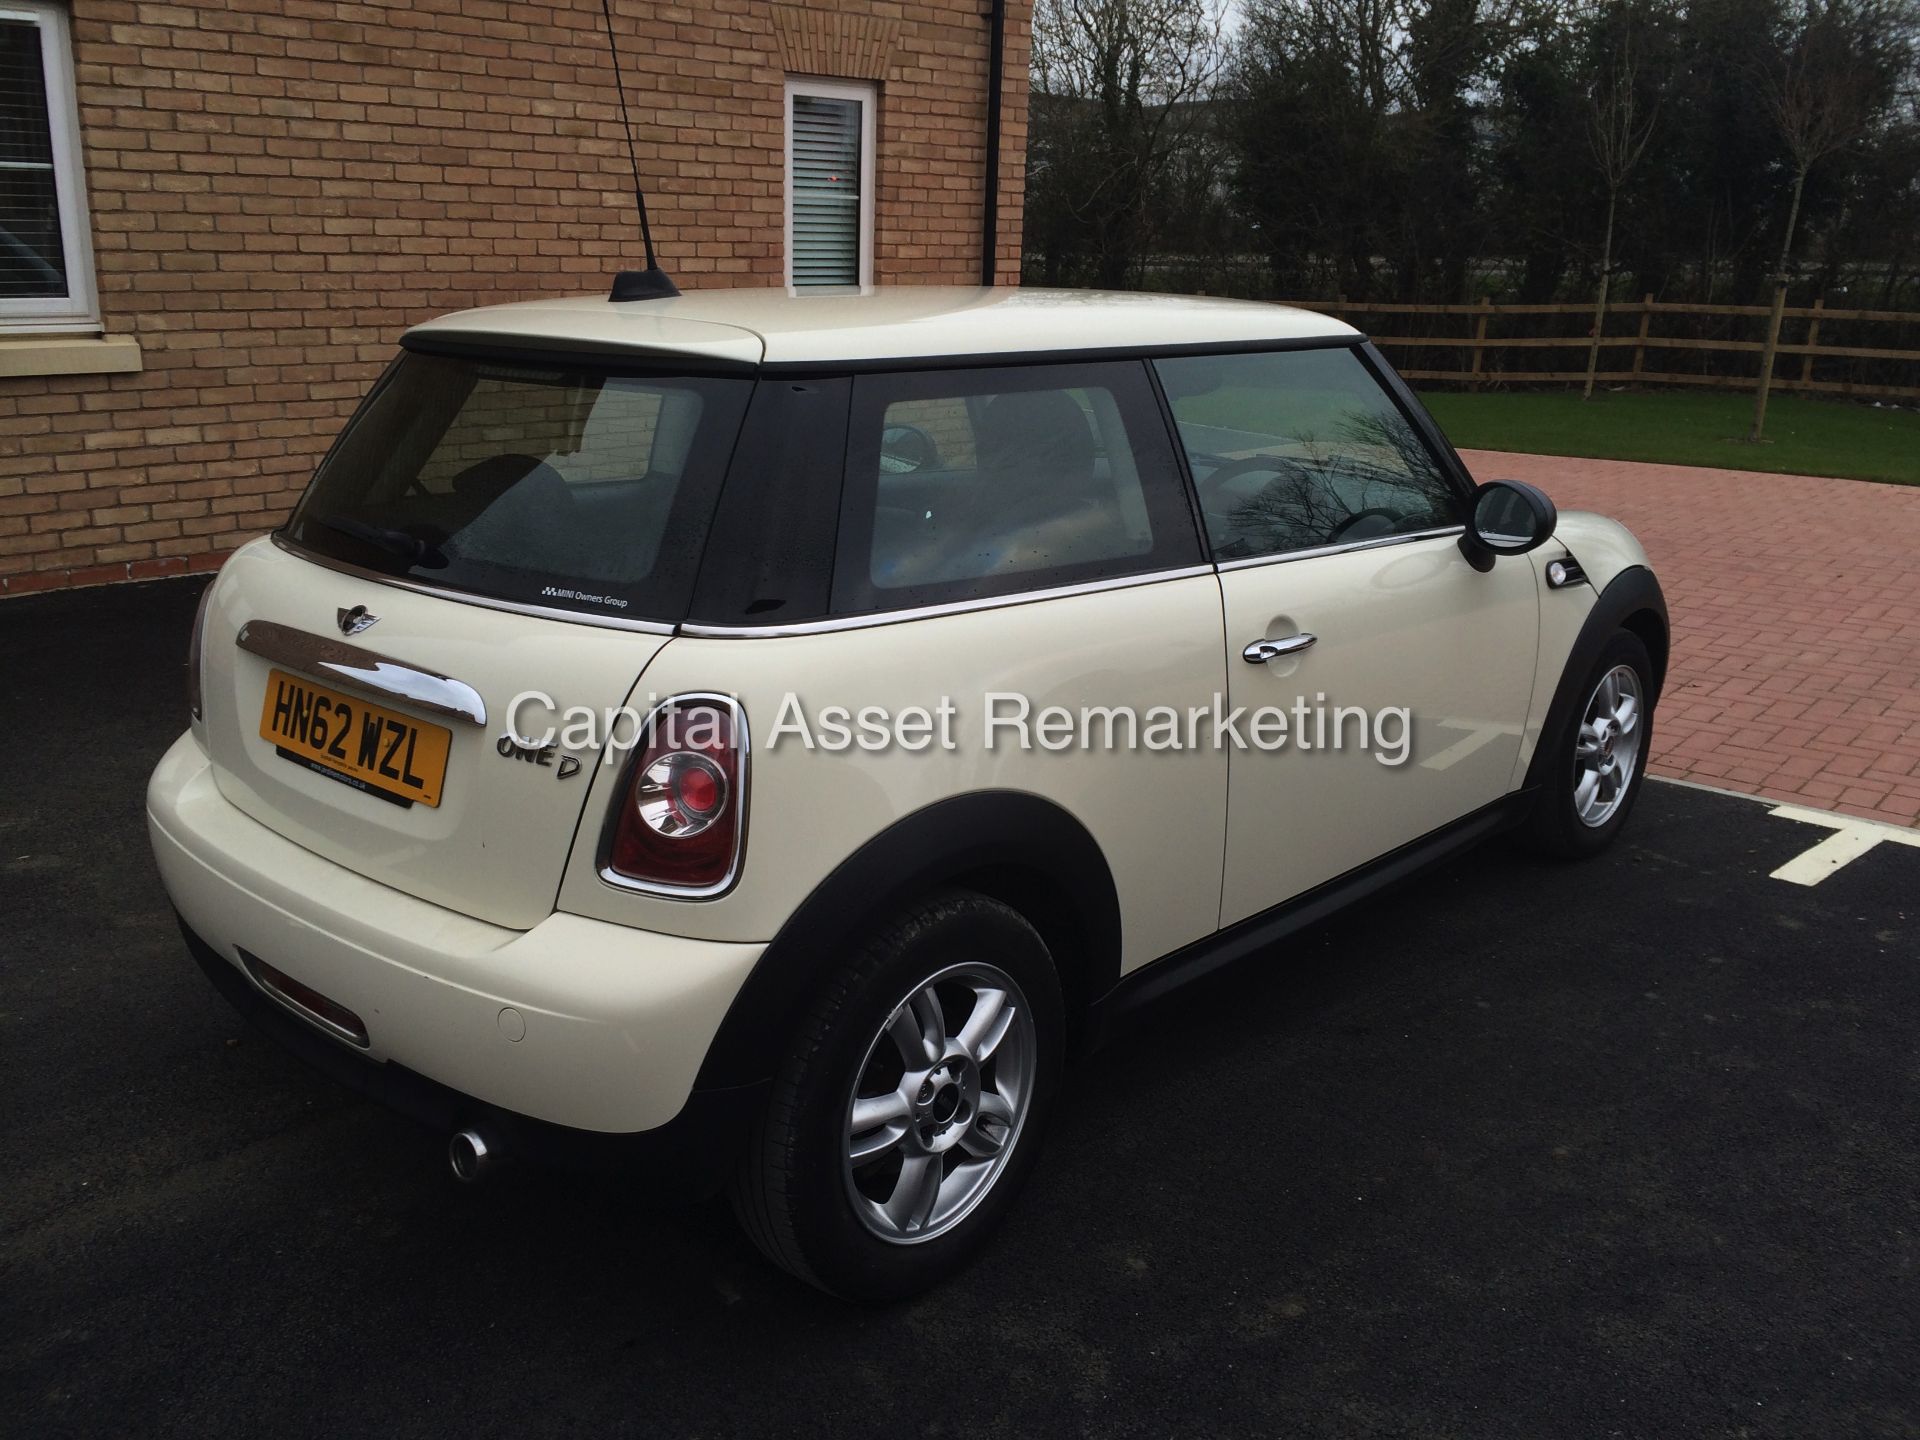 (ON SALE) MINI "ONE D" 1.6 DIESEL - WHITE (2013 MODEL) 1 OWNER - AIR CON / CLIMATE - SERVICE HISTORY - Image 7 of 18